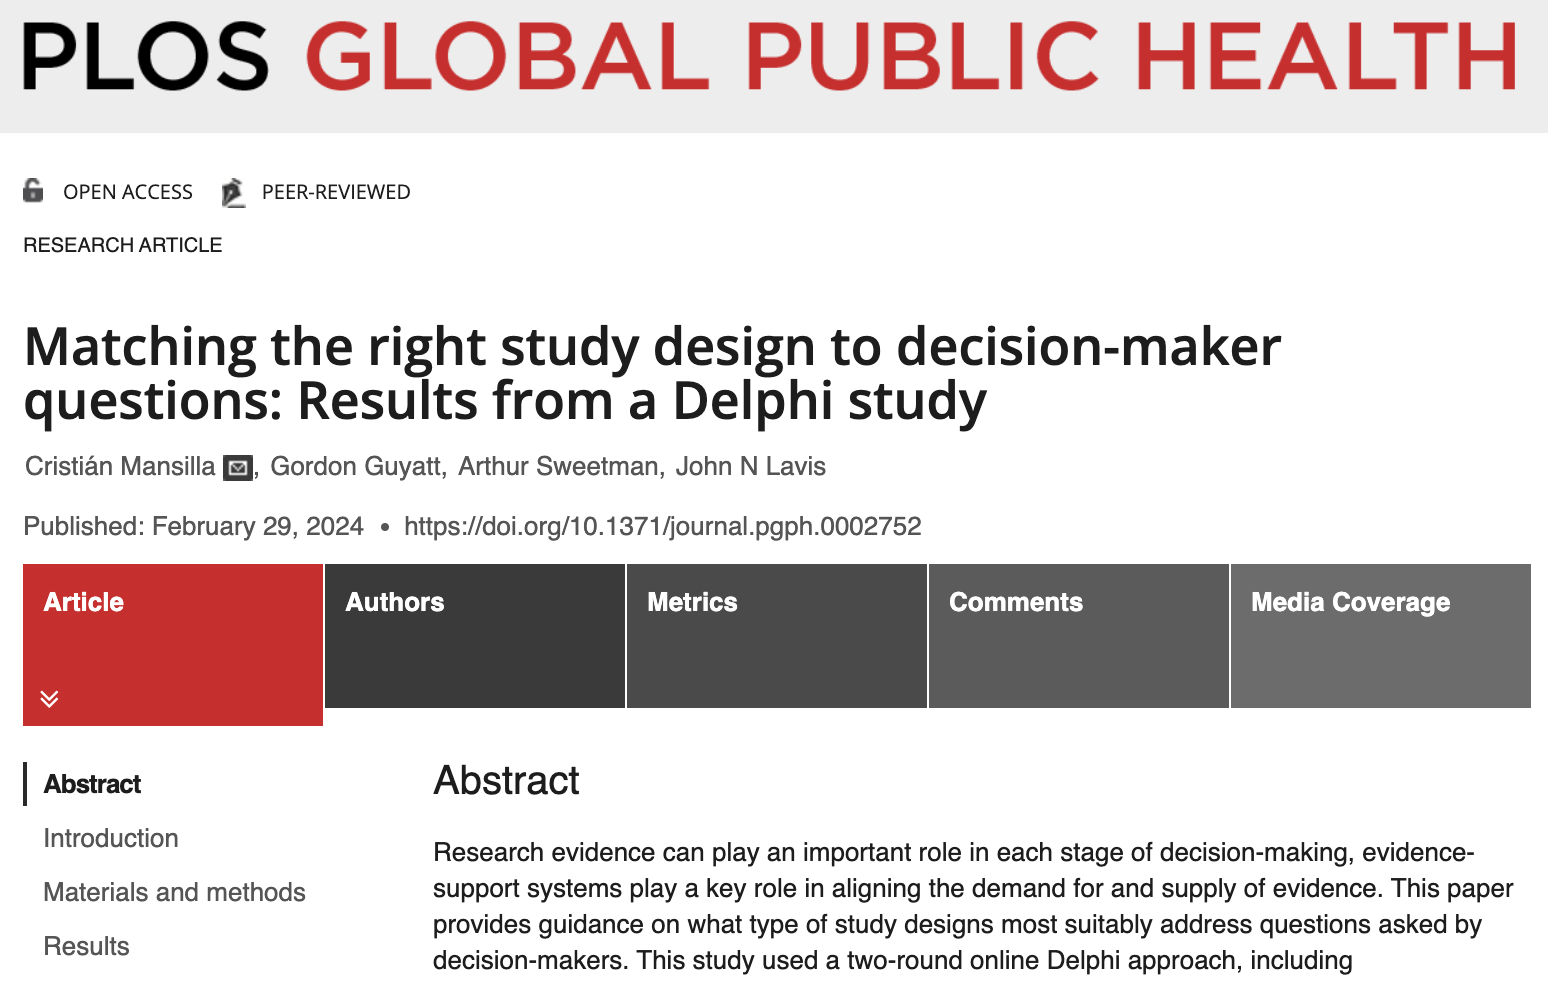 Matching the right study design to decision-maker questions: Results from a Delphi study